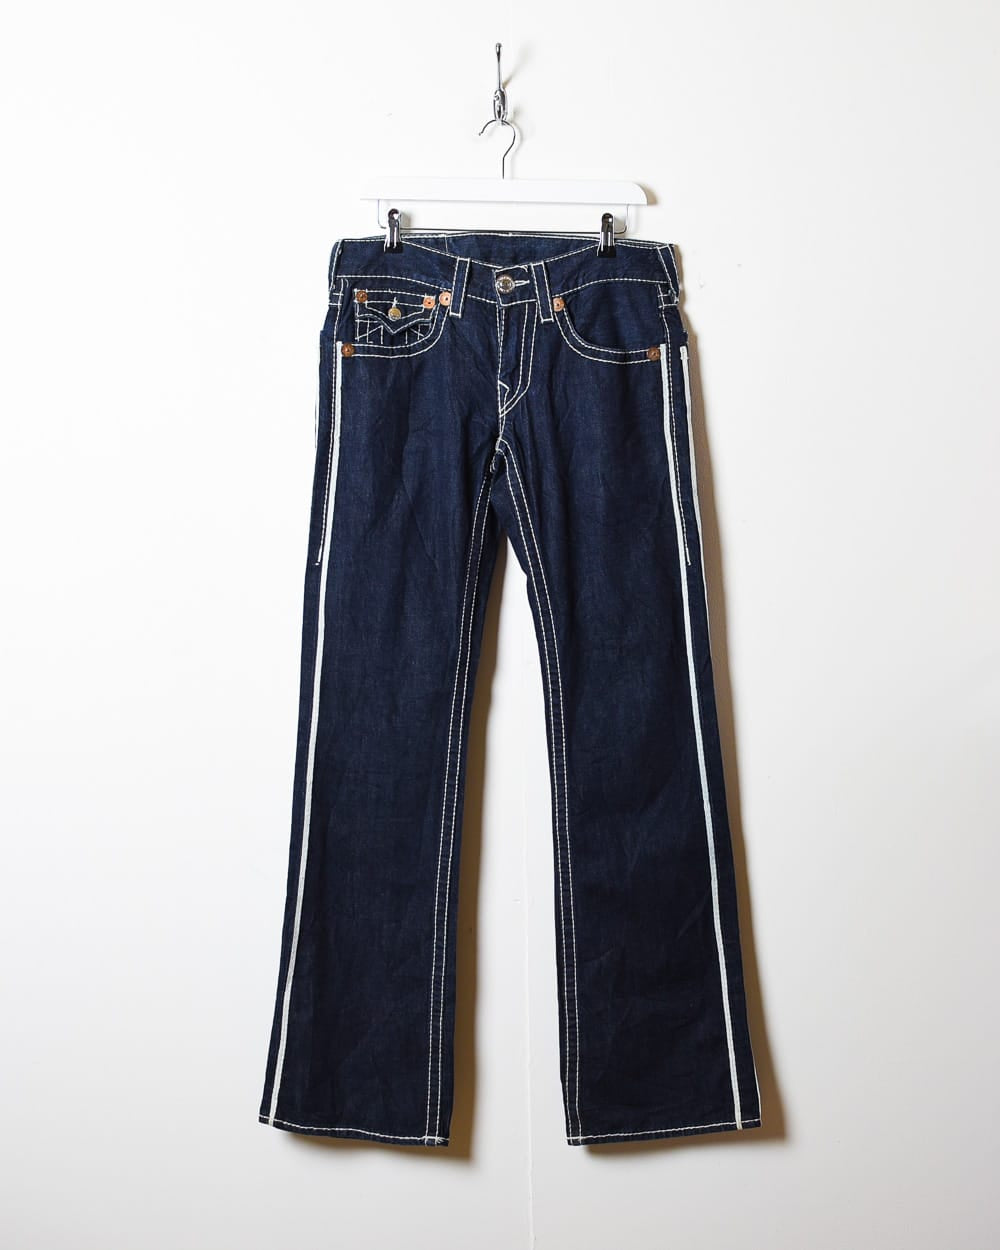 Navy True Religion Contrast Stitched Flared Jeans - W34 L34